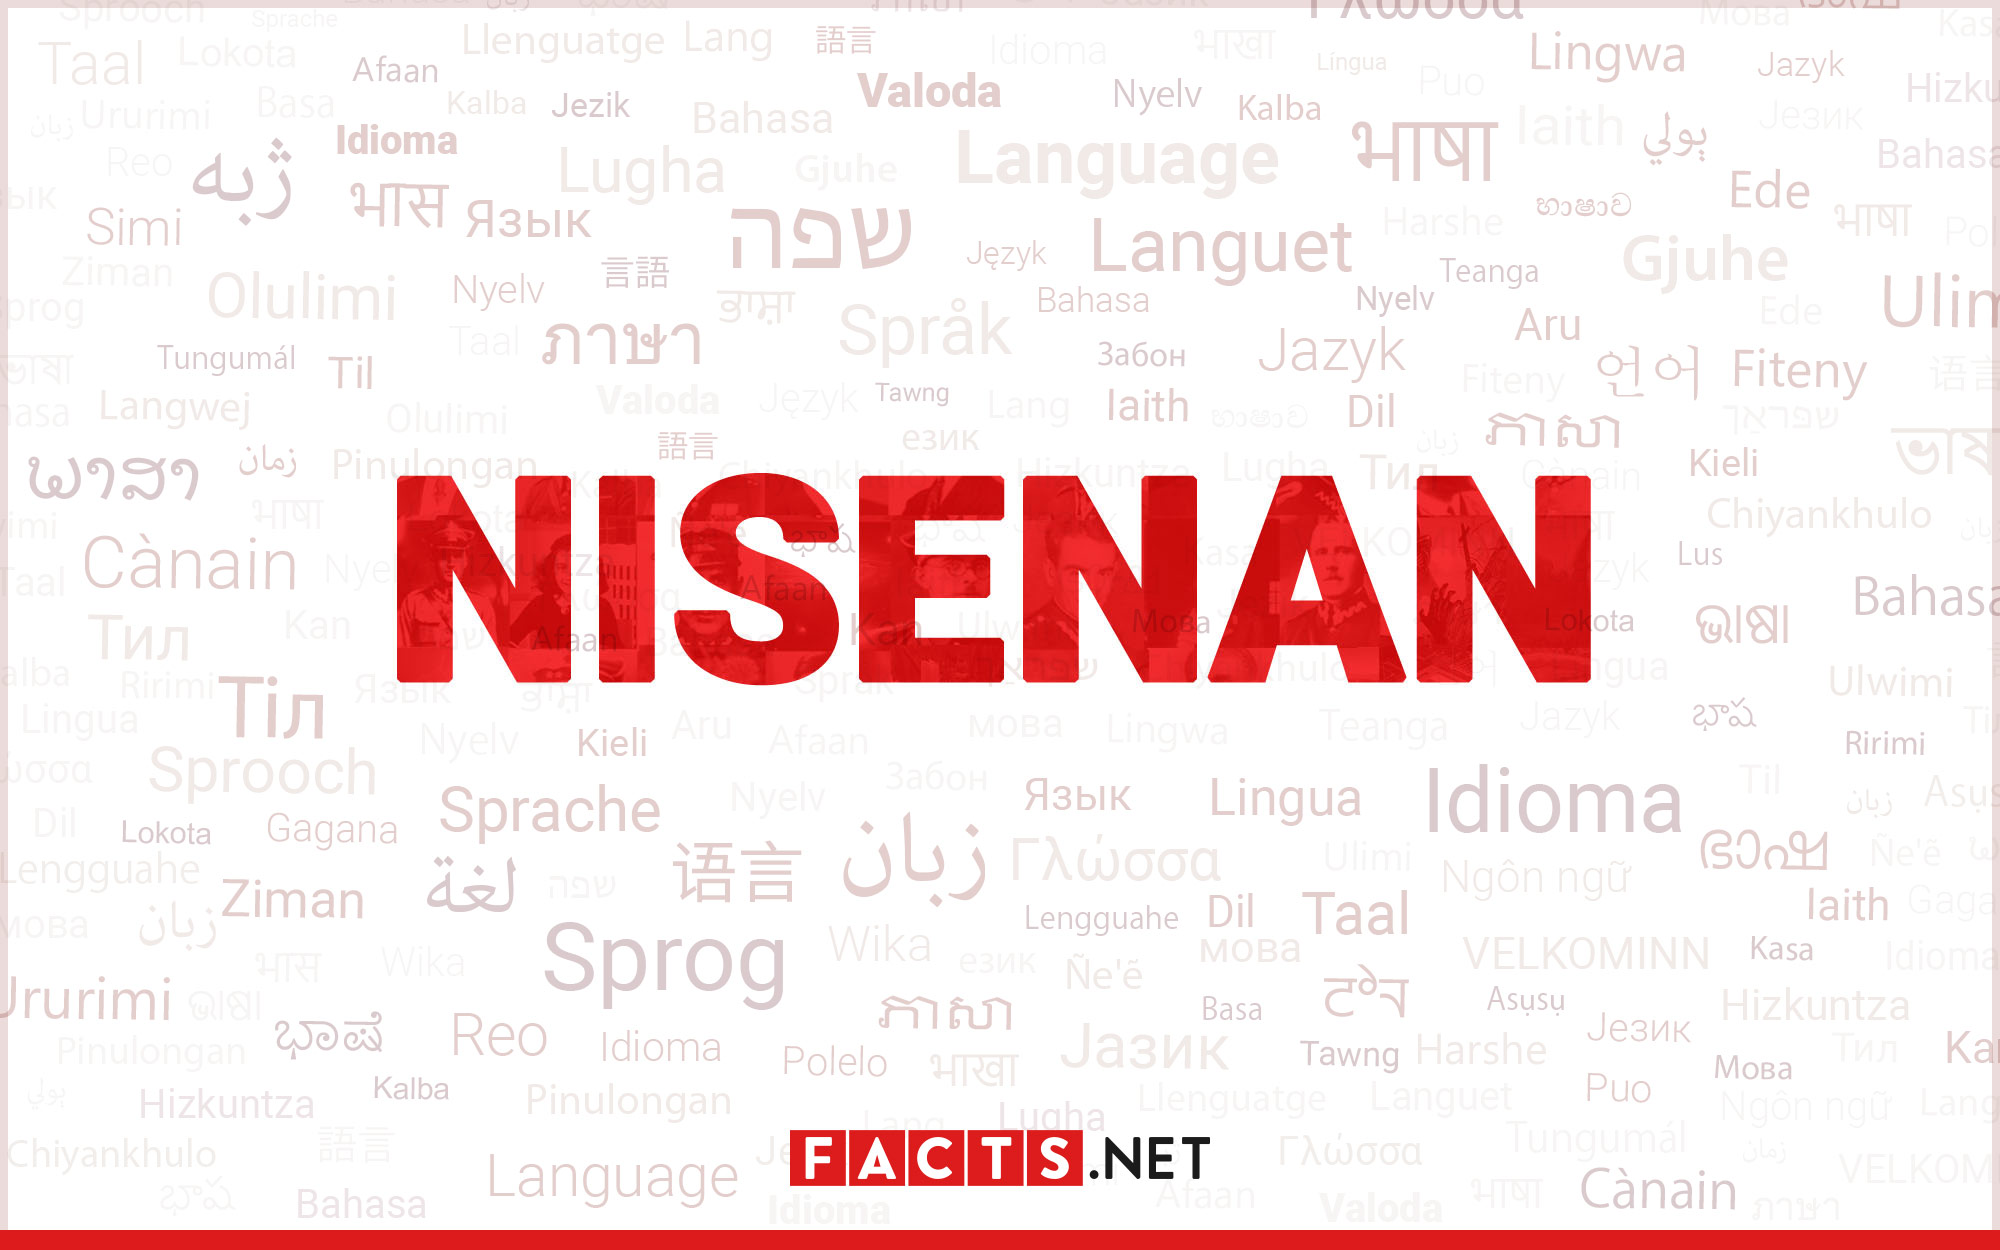 11-astounding-facts-about-nisenan